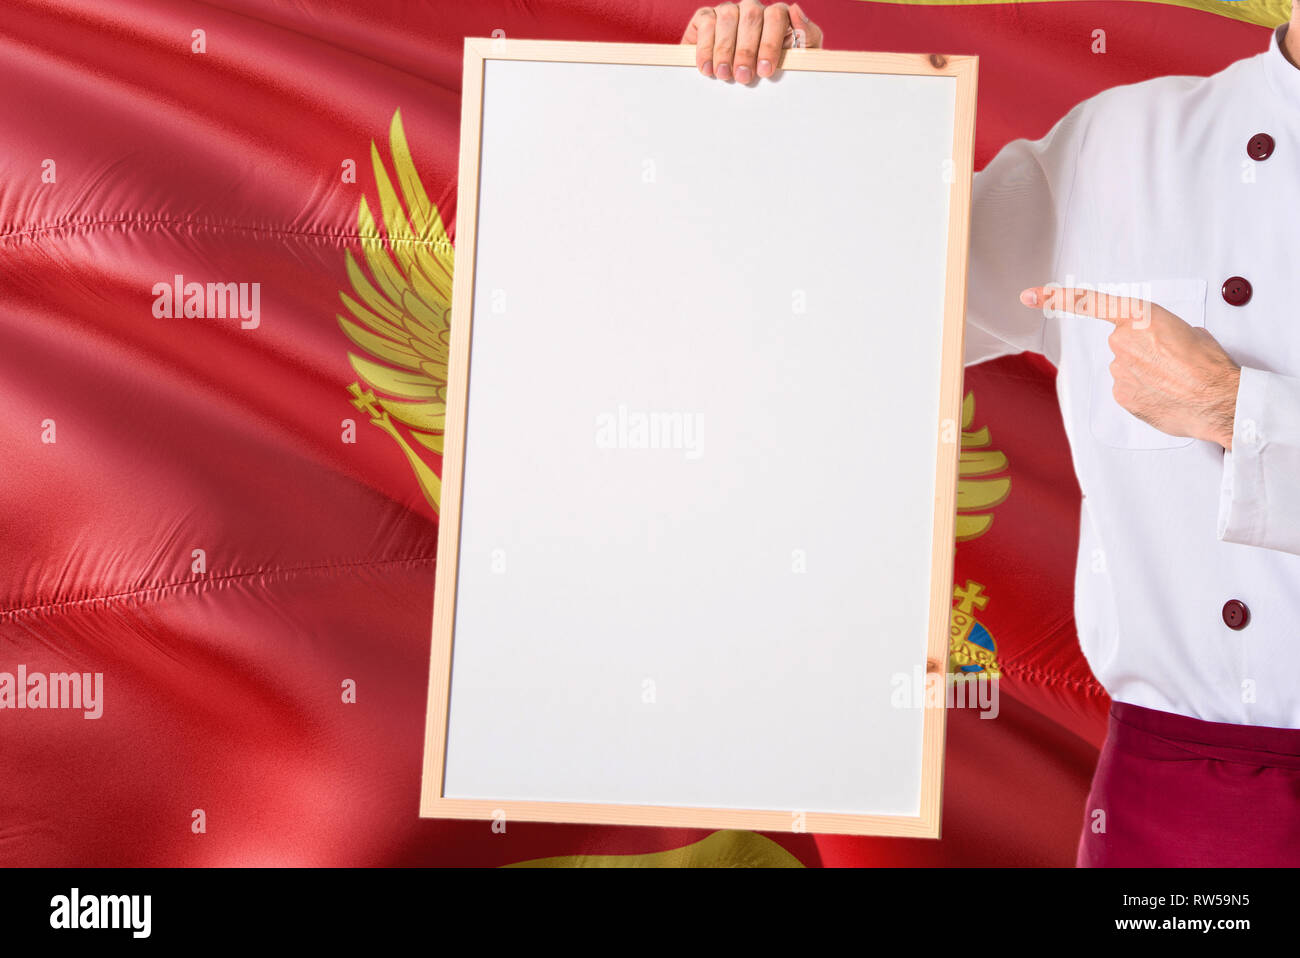 Montenegrin Chef holding blank whiteboard menu on Montenegro flag background. Cook wearing uniform pointing space for text. Stock Photo